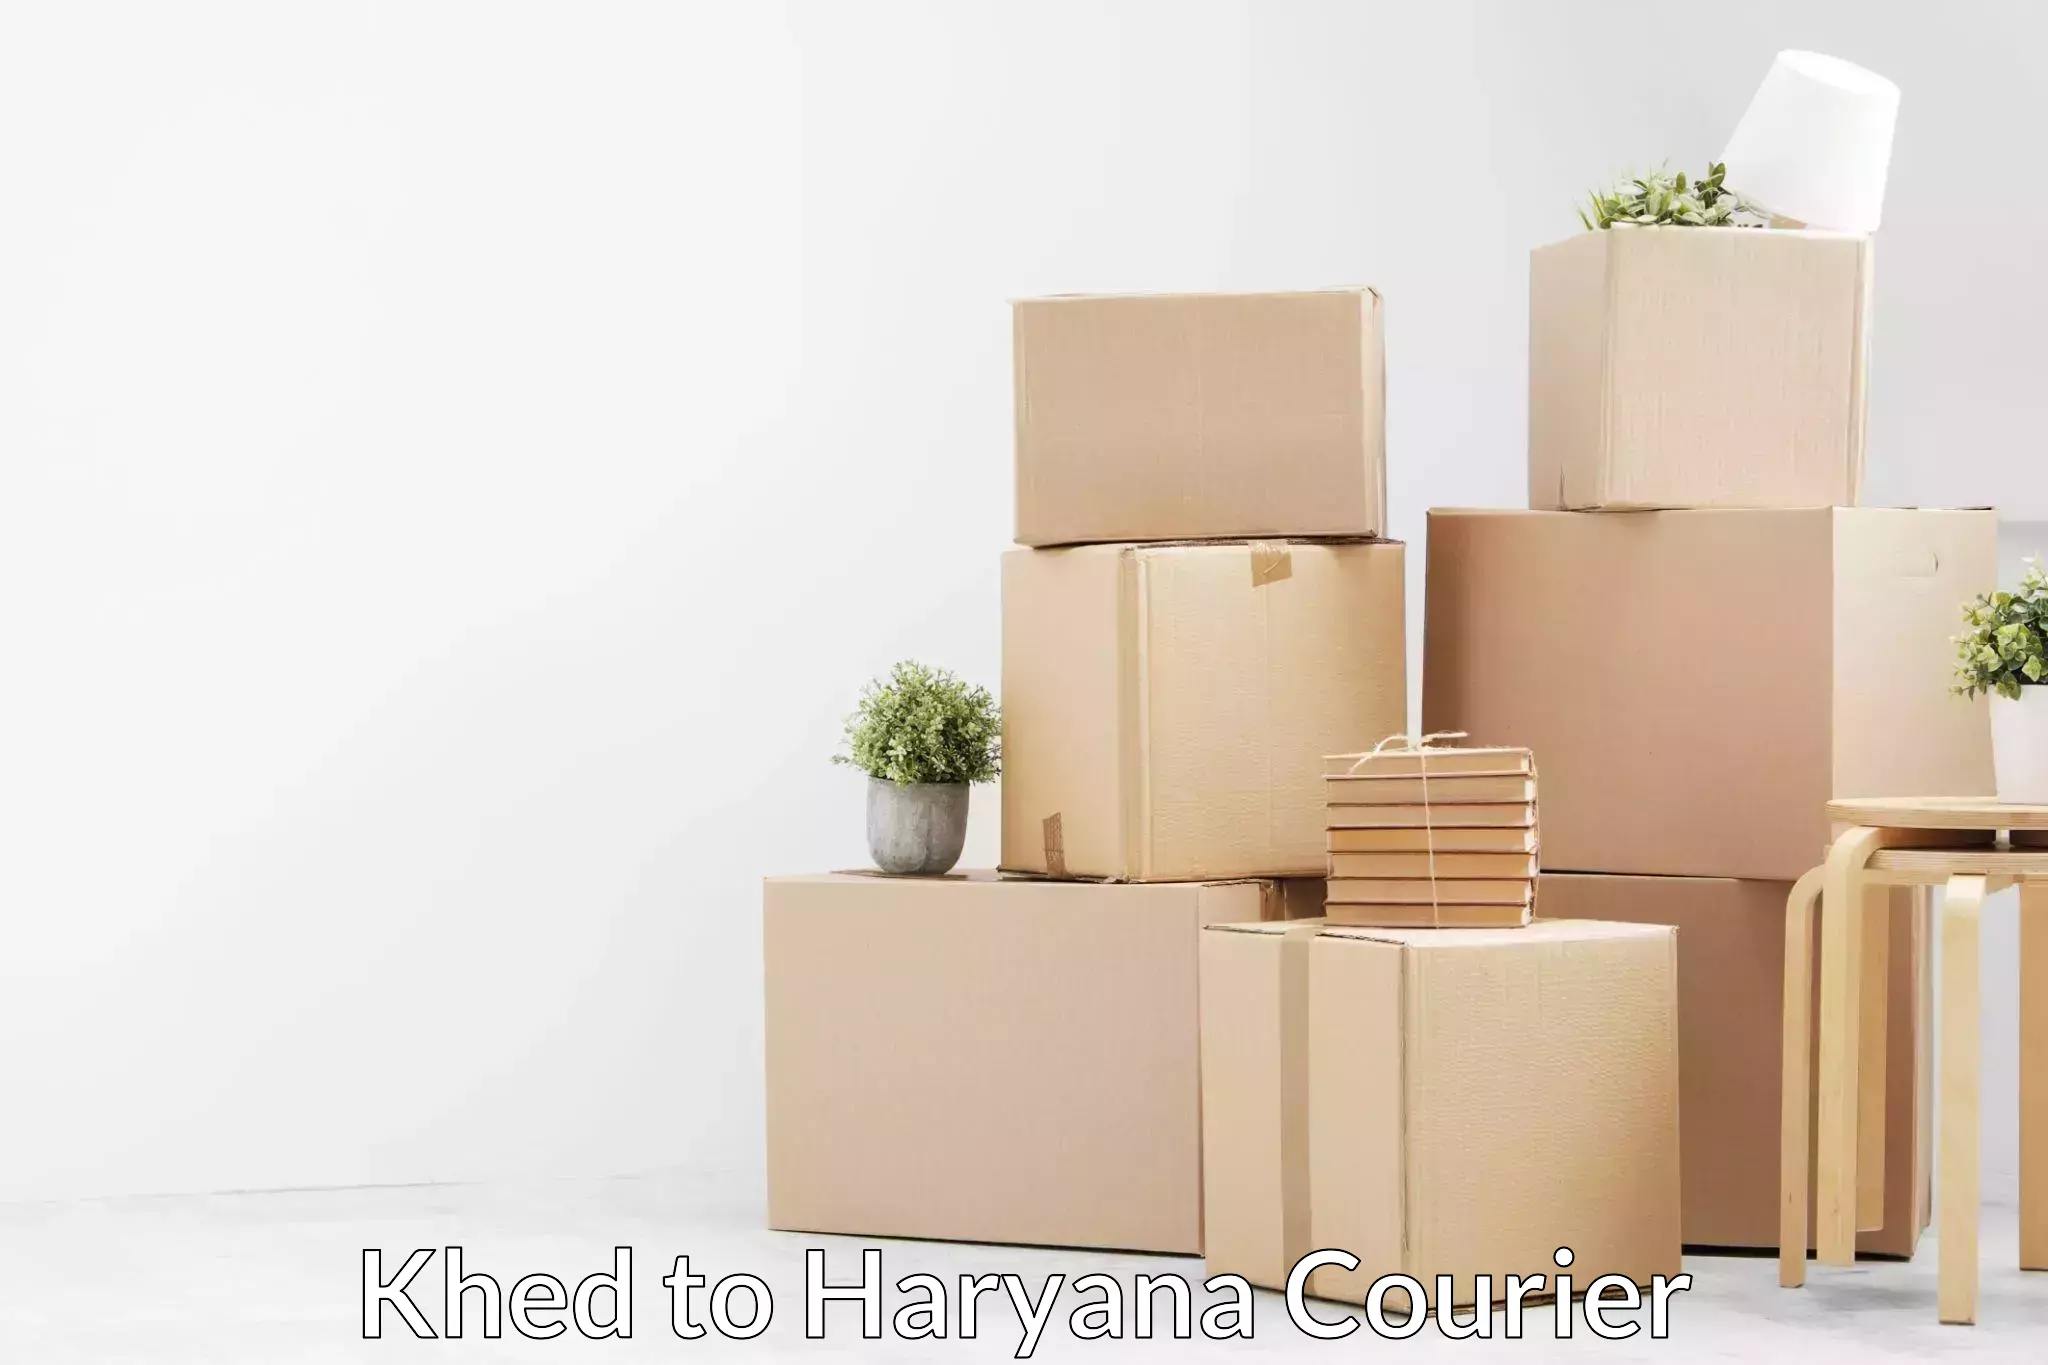 Dependable furniture transport Khed to NCR Haryana